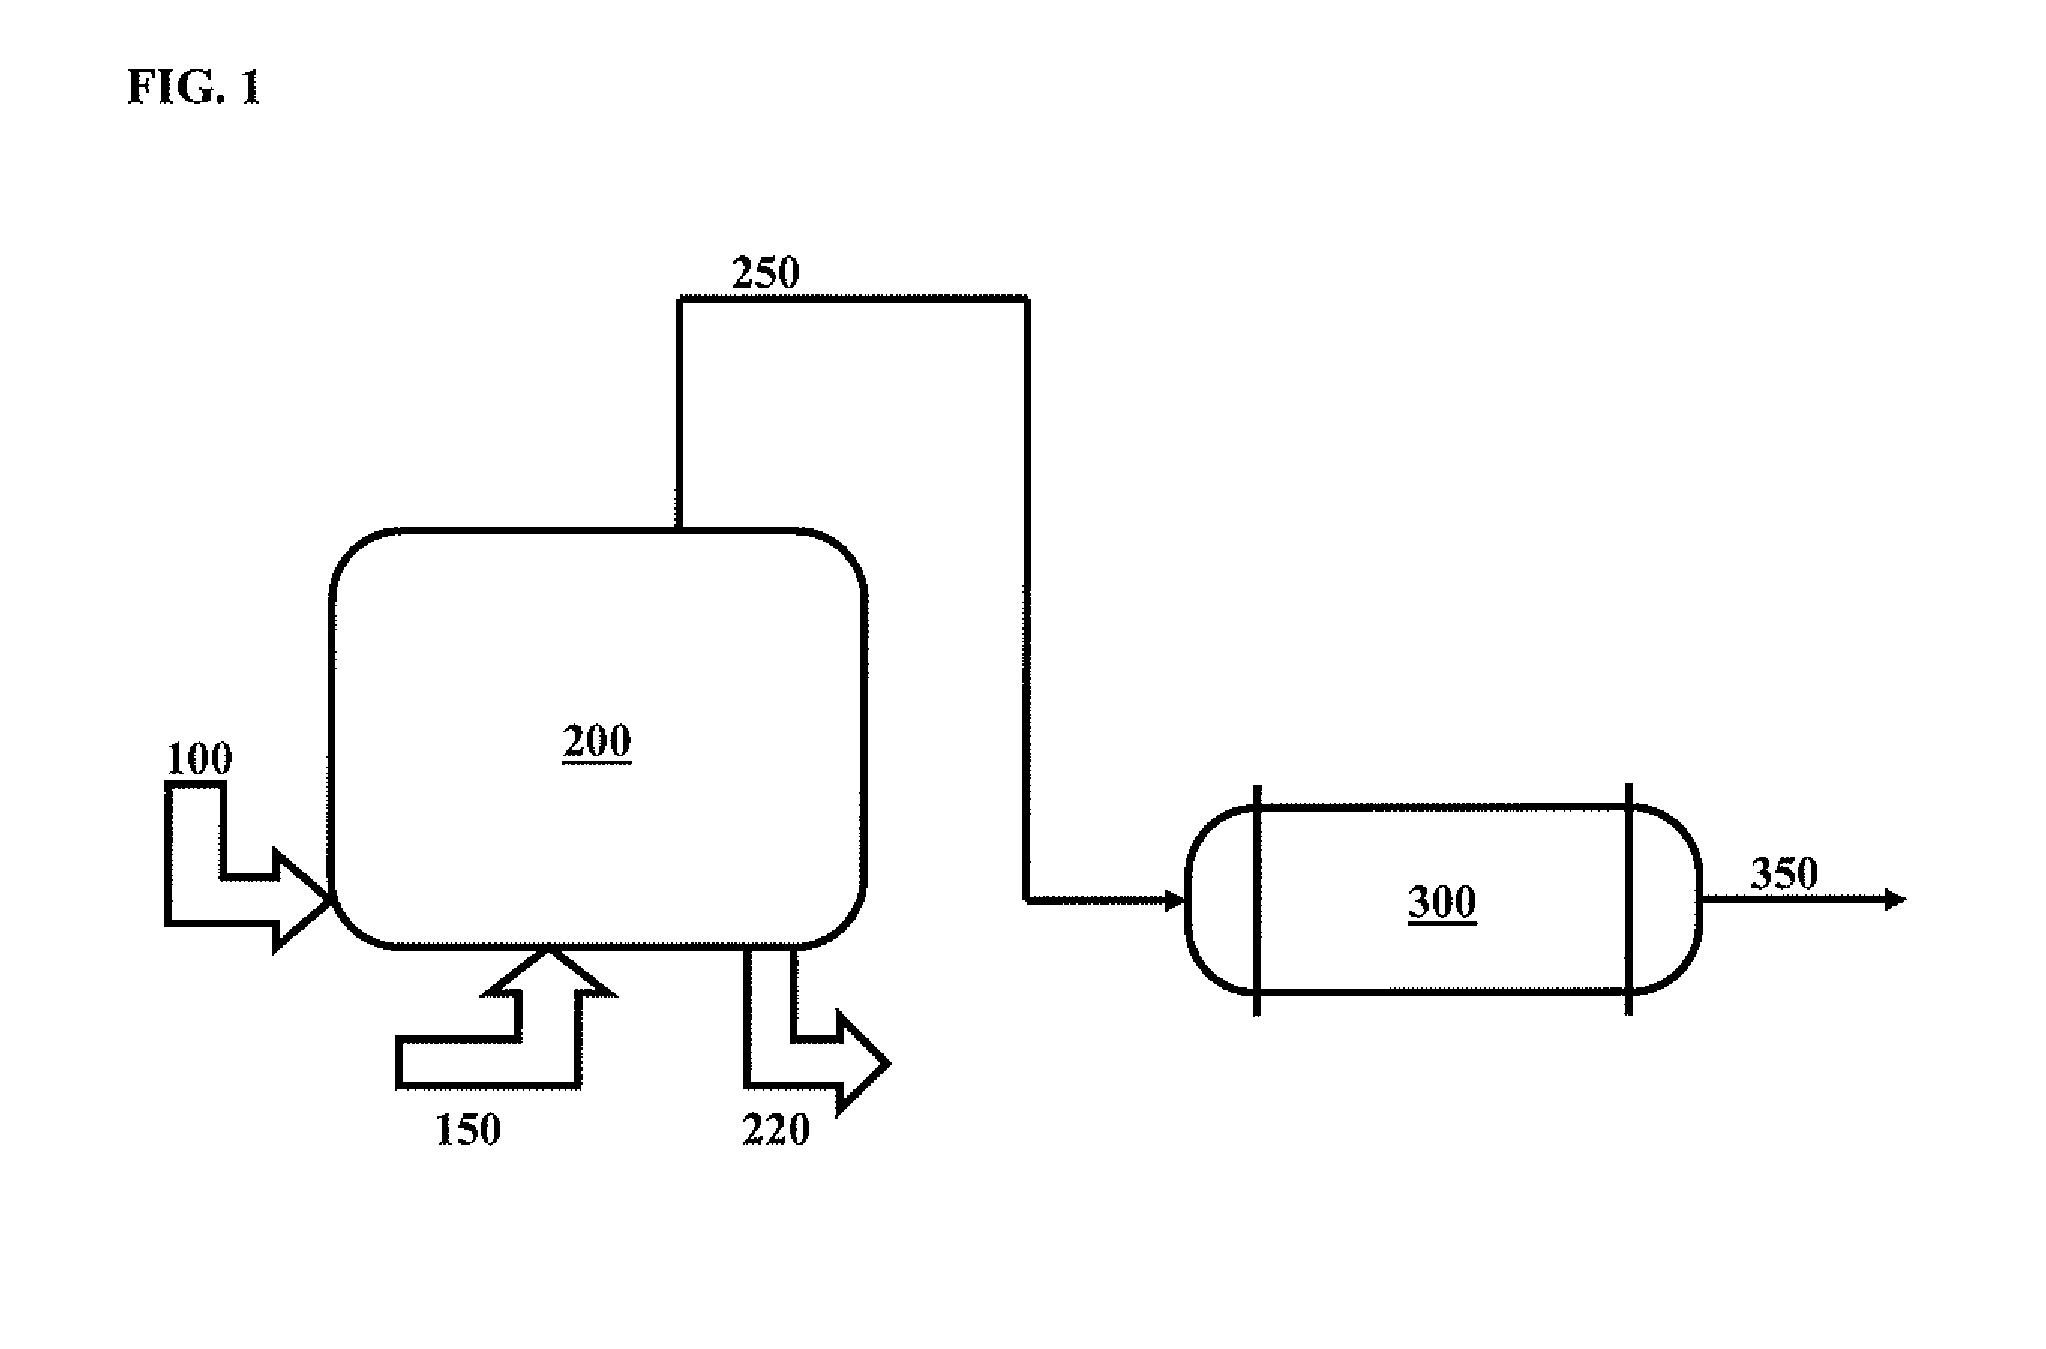 Method of Operation of Process to Produce Syngas from Carbonaceous Material